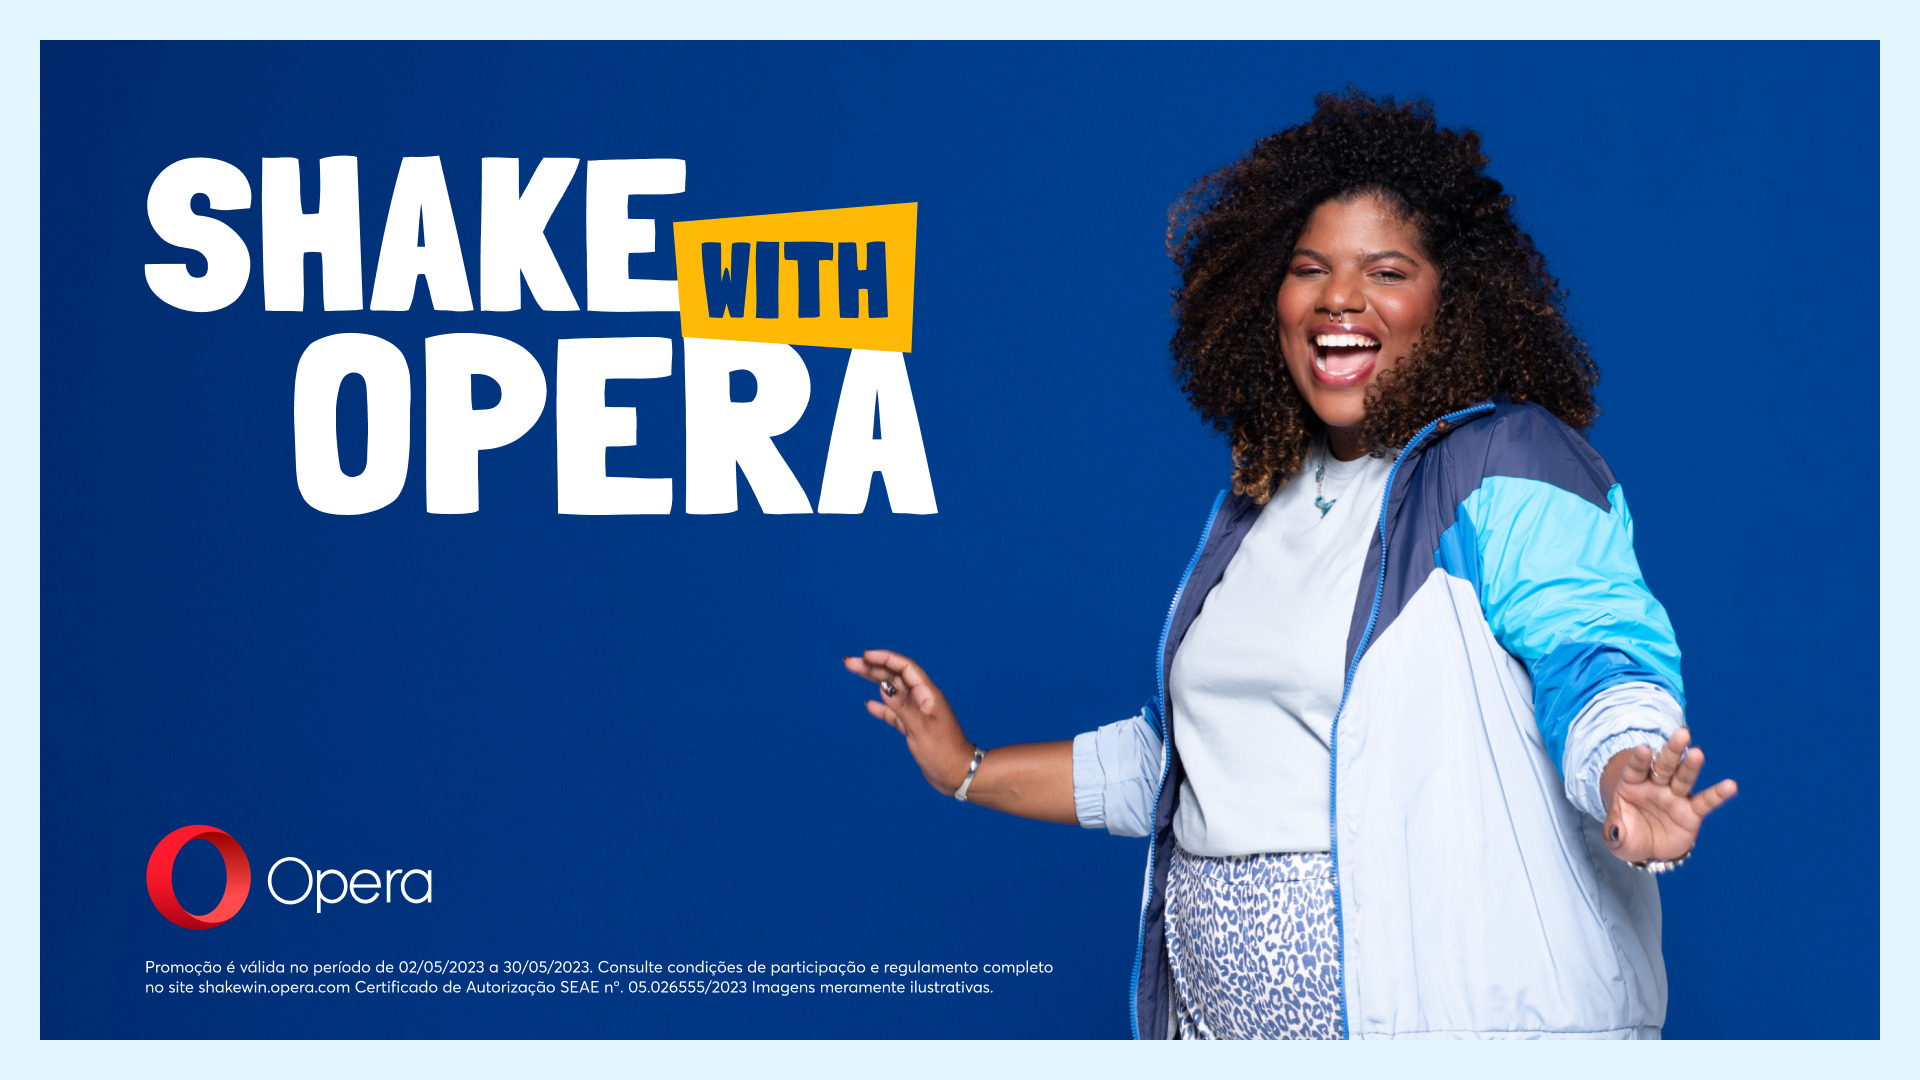 Opera's Shake and Win is back!